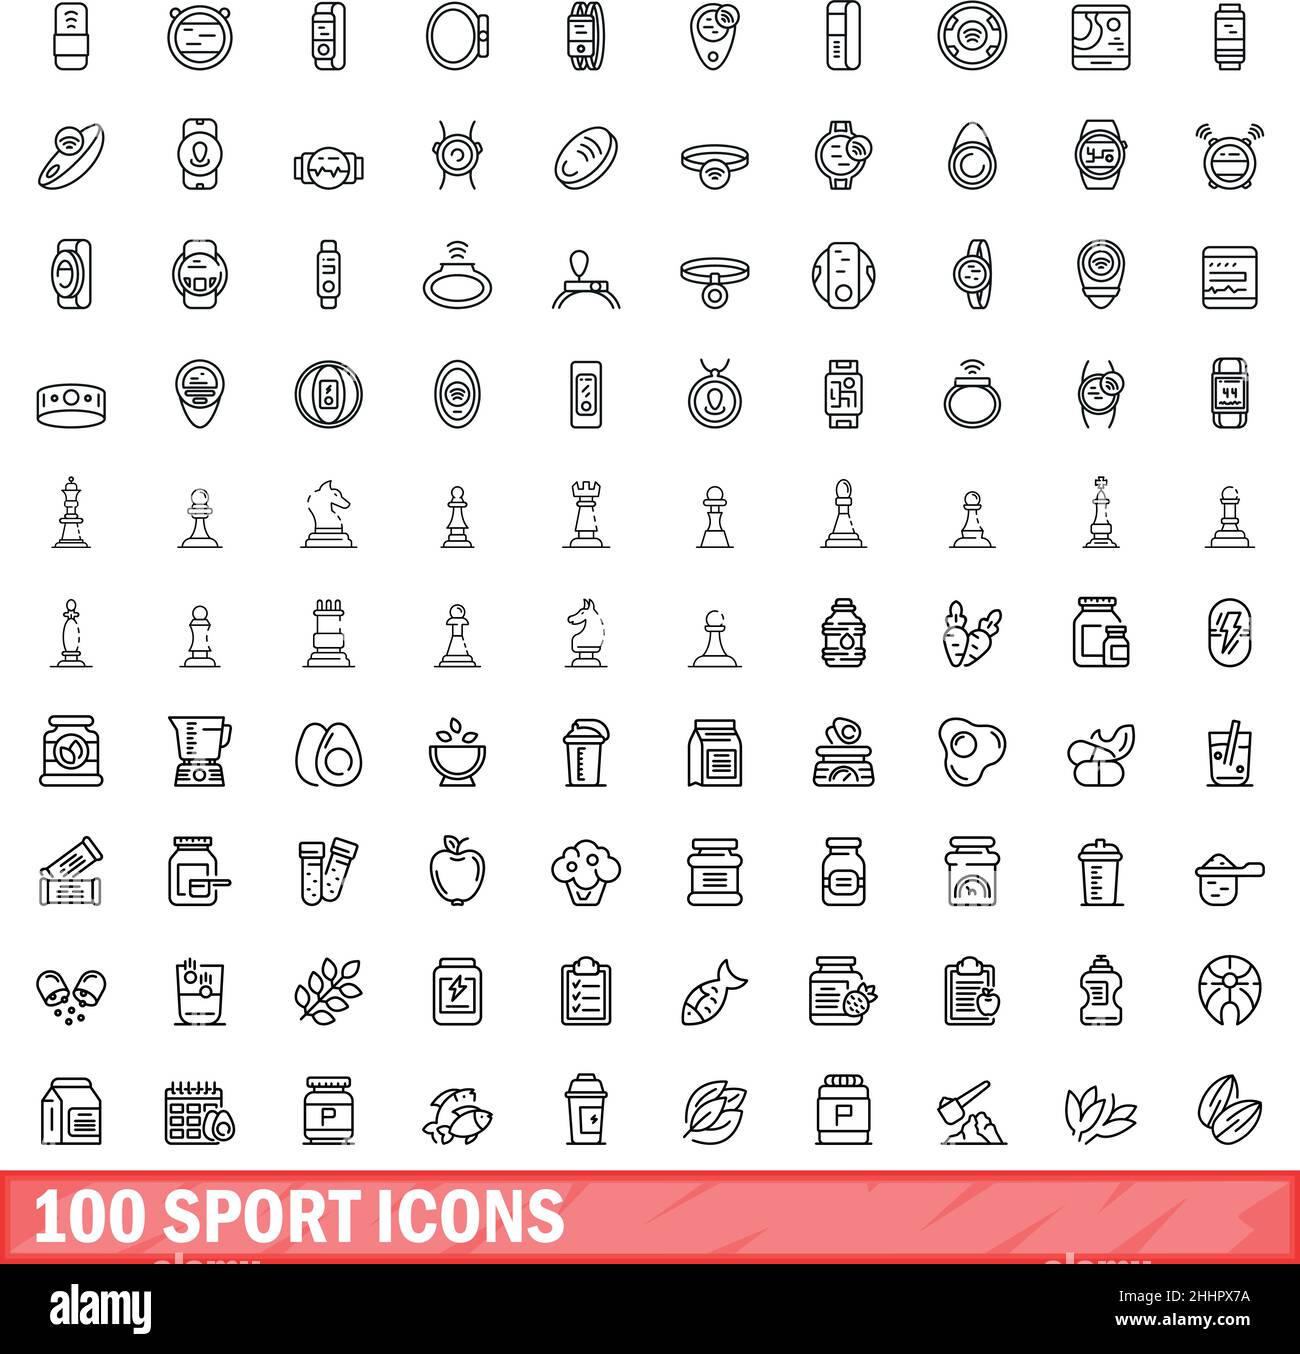 100 sport icons set. Outline illustration of 100 sport icons vector set isolated on white background Stock Vector